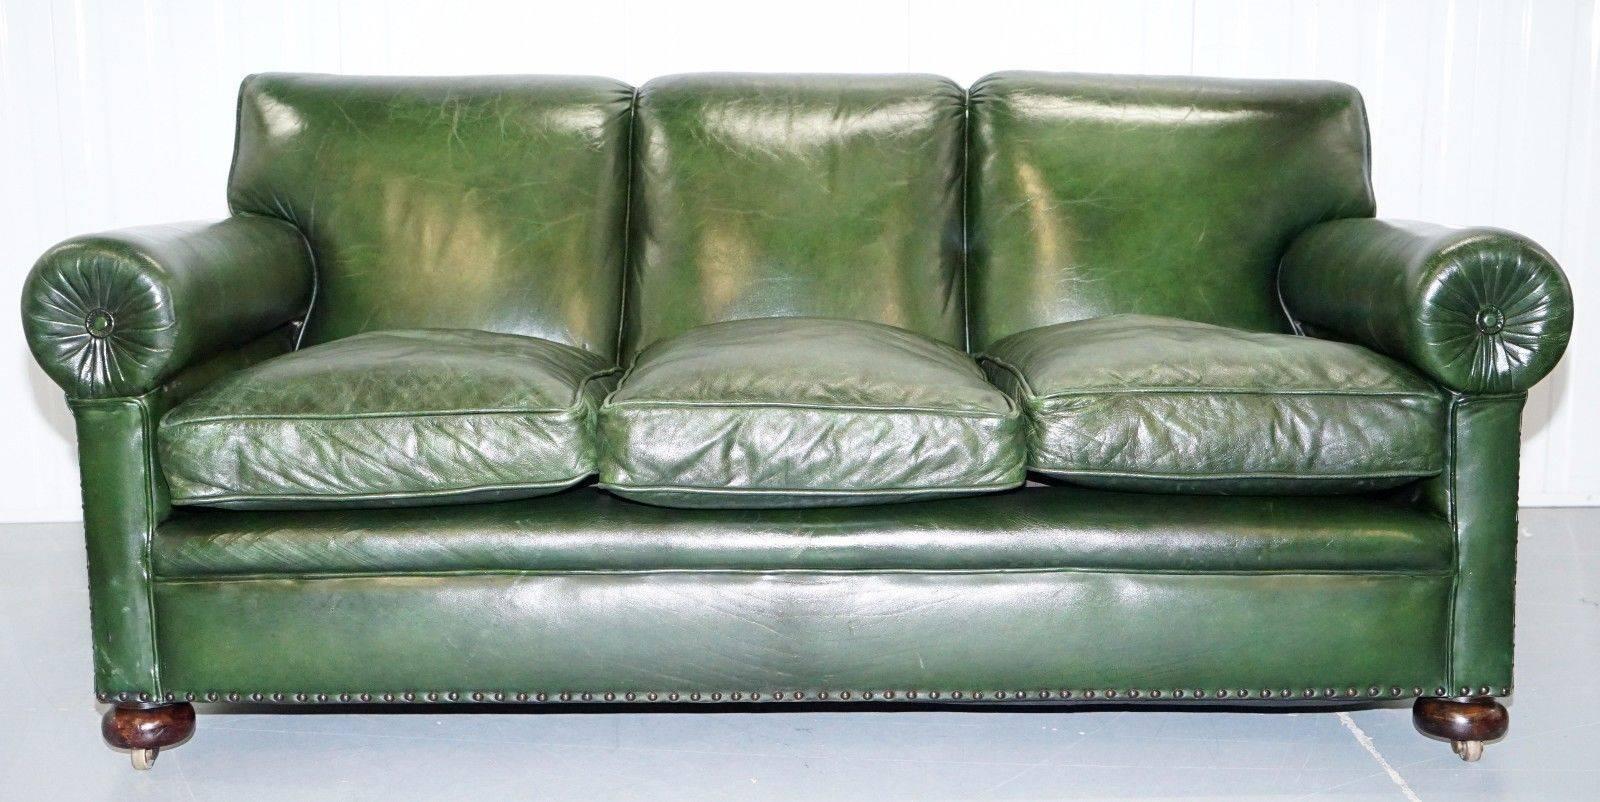 We are delighted to offer for sale this lovely Victorian Maple & Co “The Hever” aged green leather three seater club sofa with feather filled cushions

One of the best looking and most charming sofas I have ever seen, the cushions are lightly